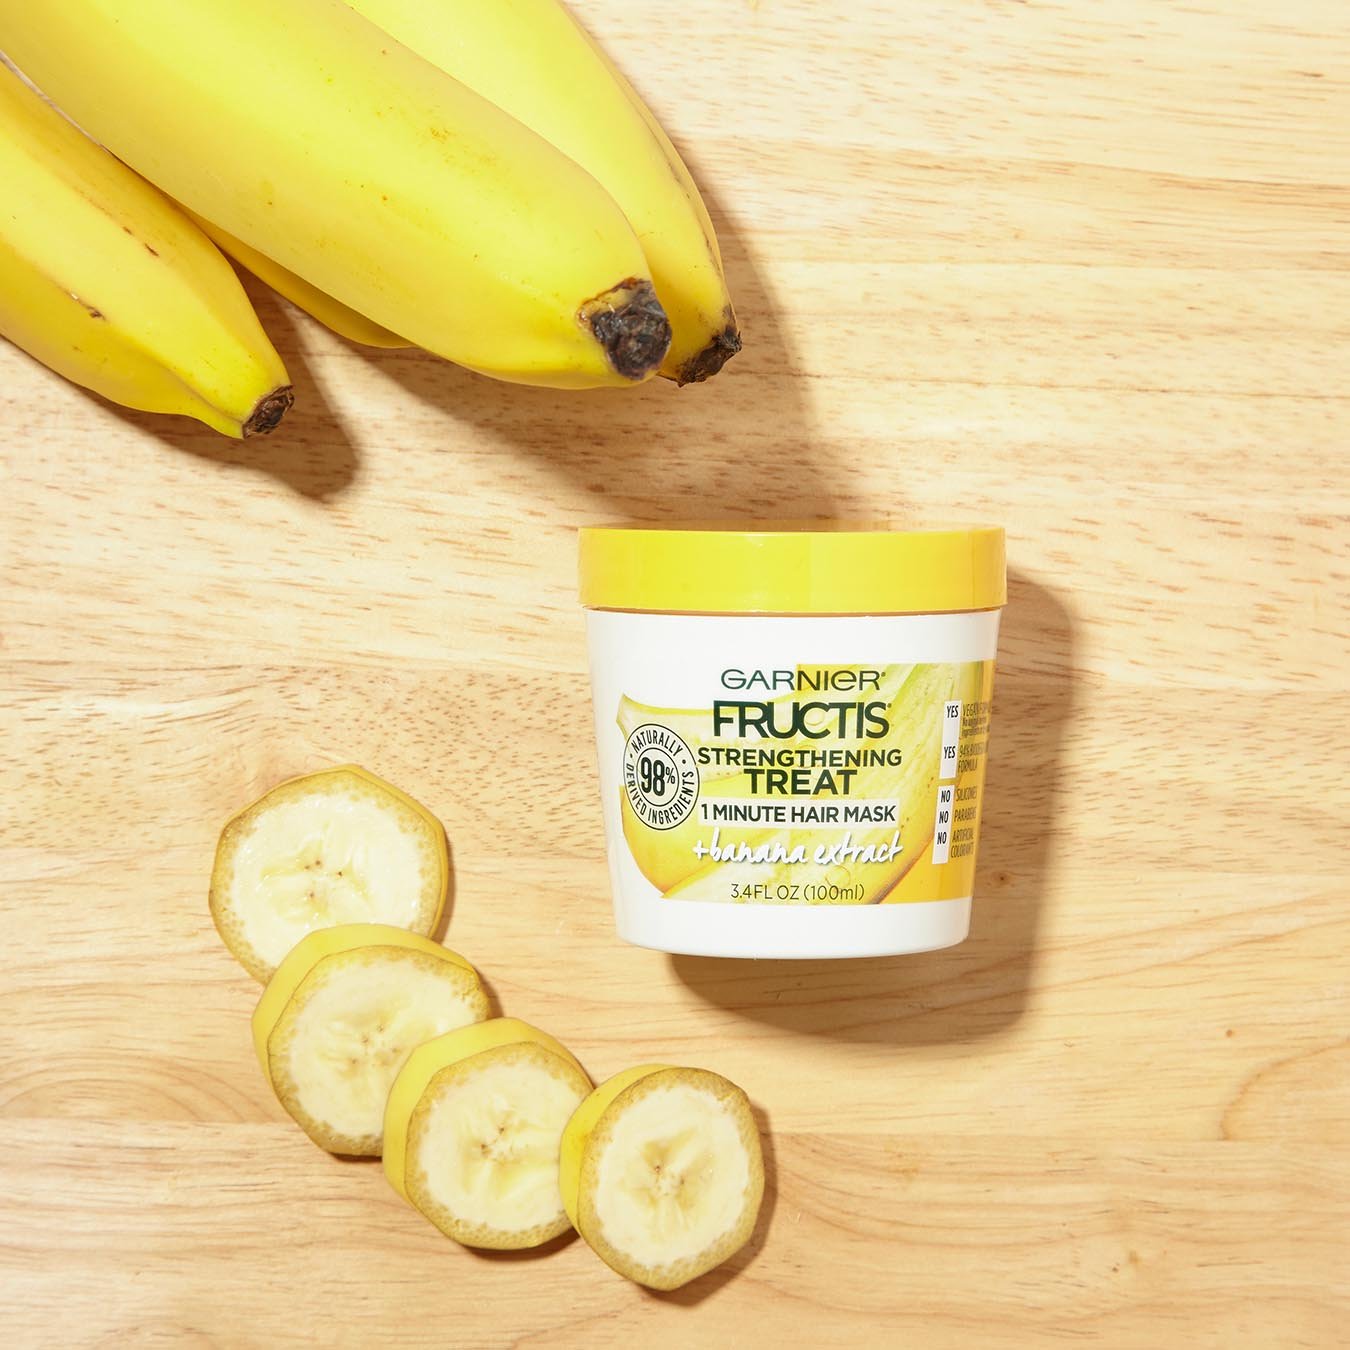 Garnier Fructis Strengthening Treat 1 Minute Hair Mask with Banana Extract on a wooden background next to a bunch of bananas and banana slices.